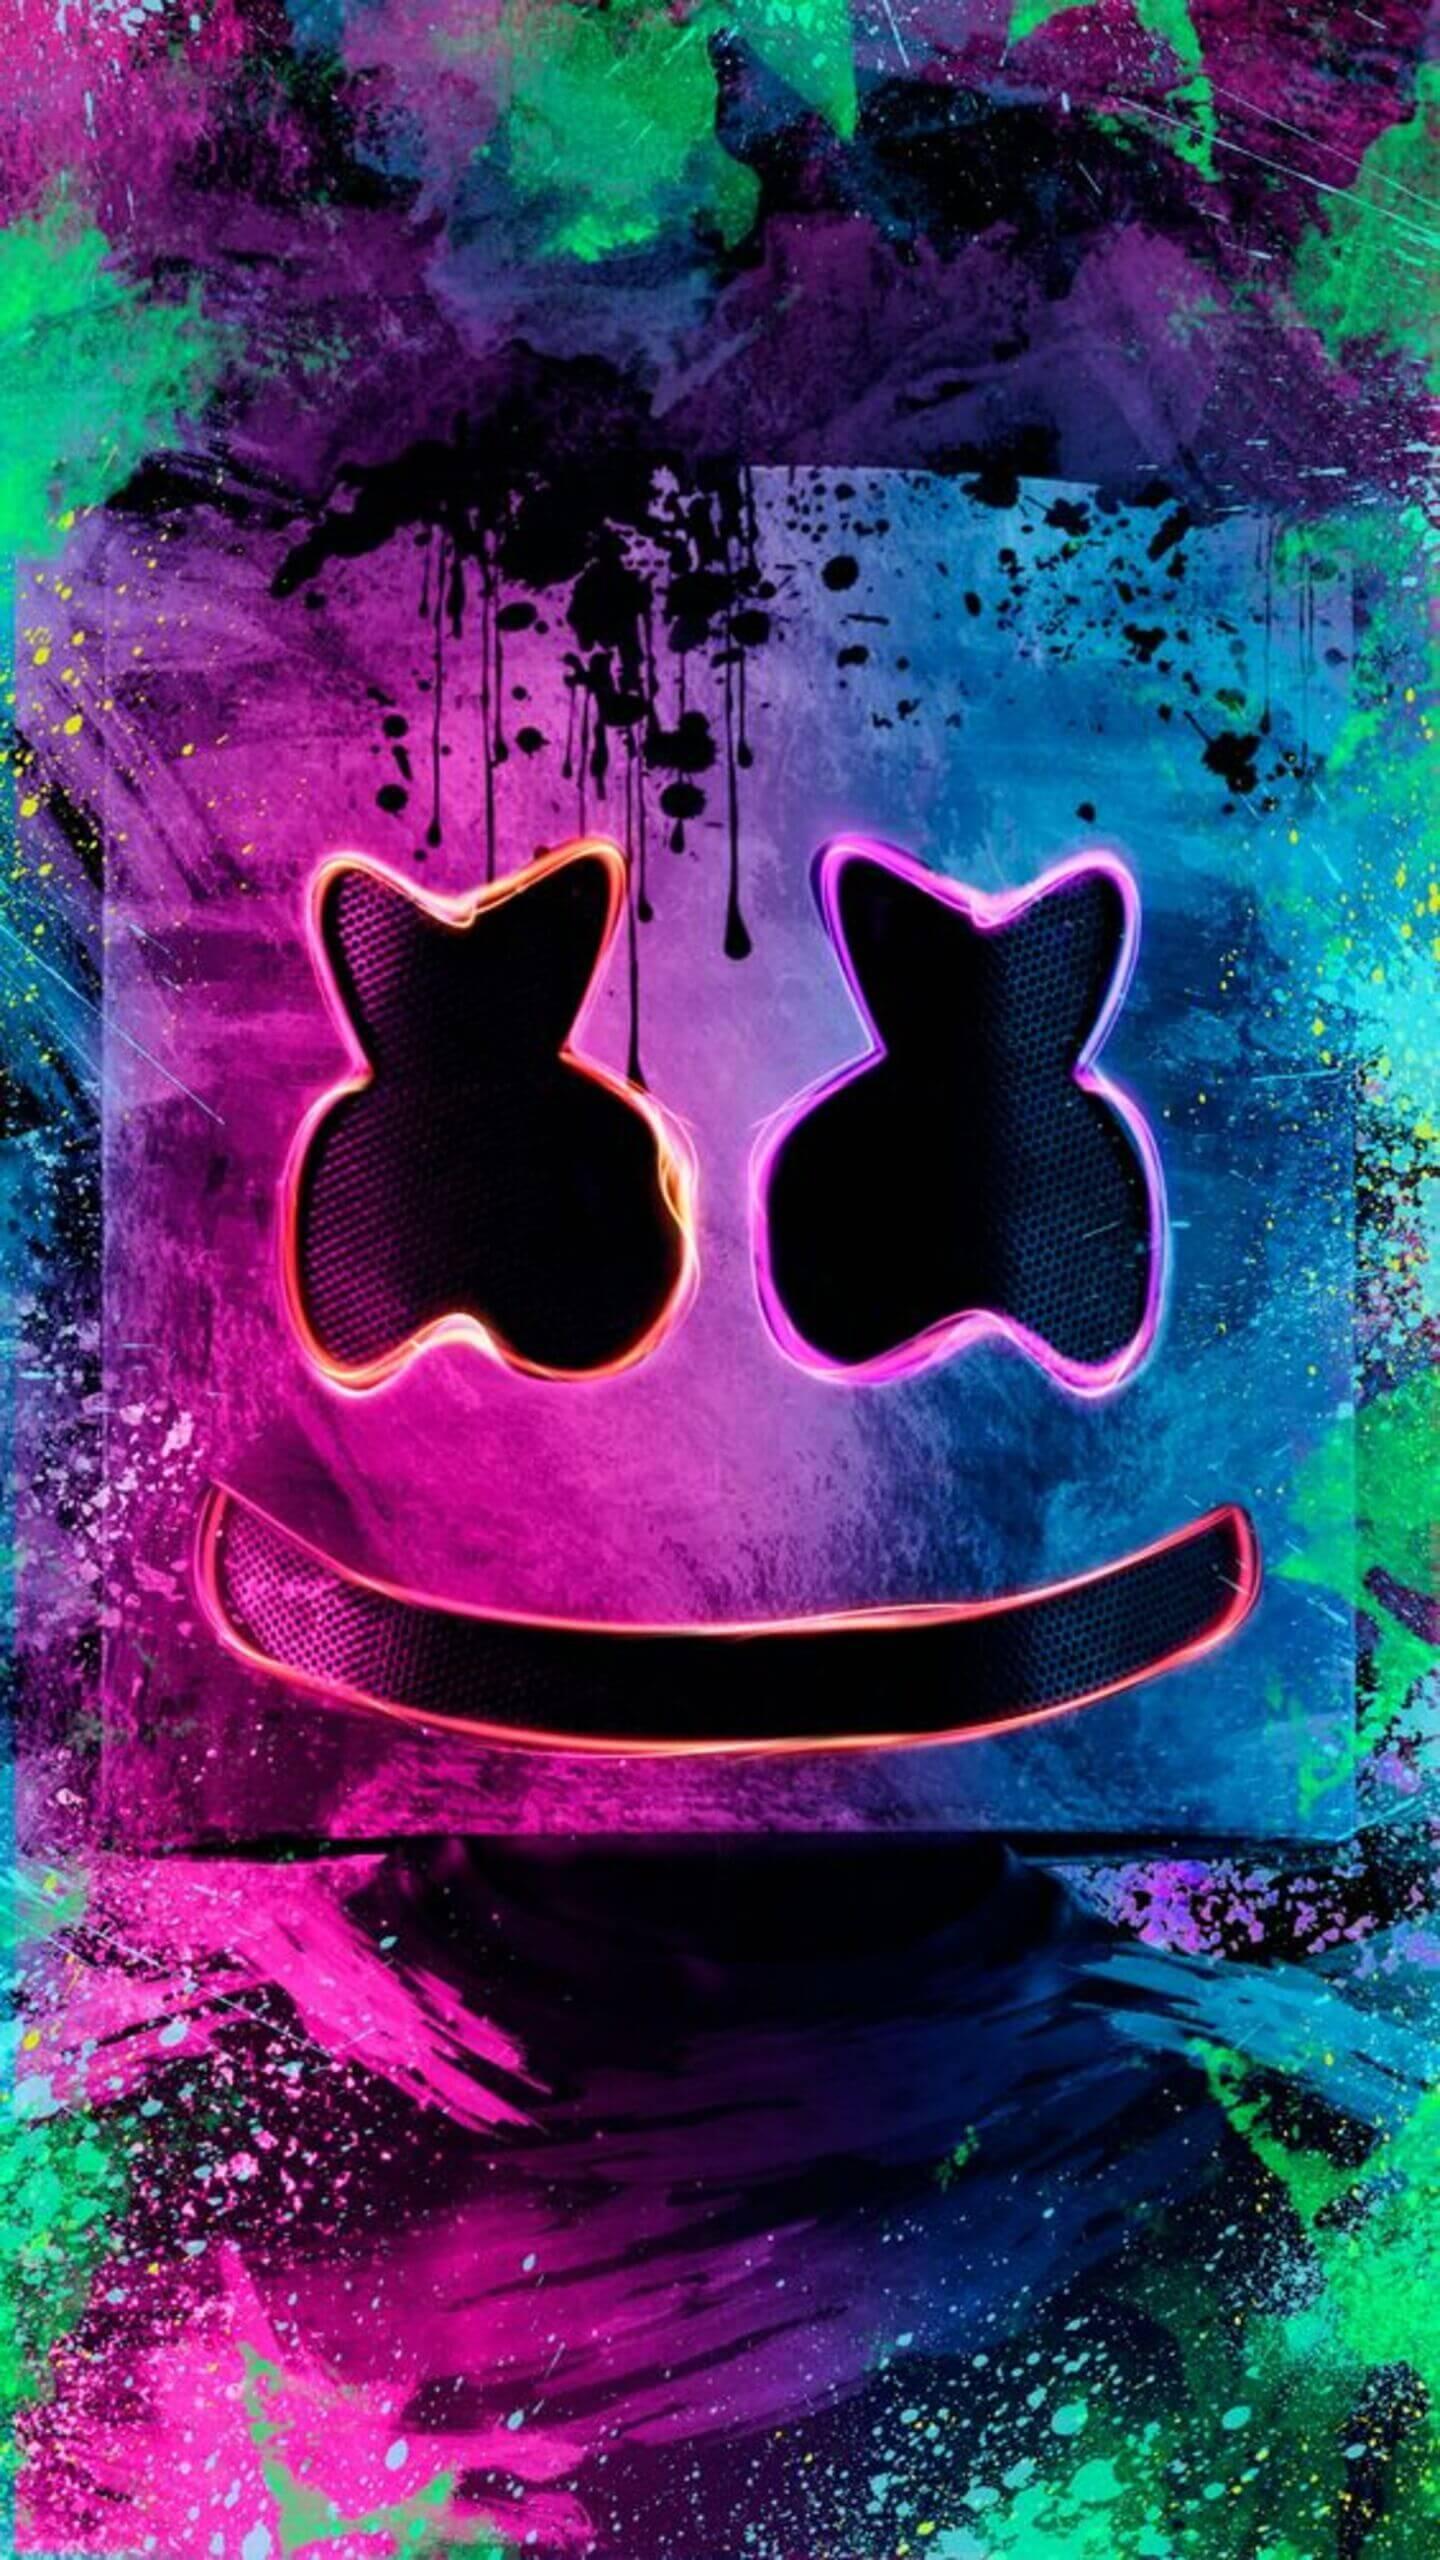 HD Marshmello Android Wallpapers - Wallpaper Cave